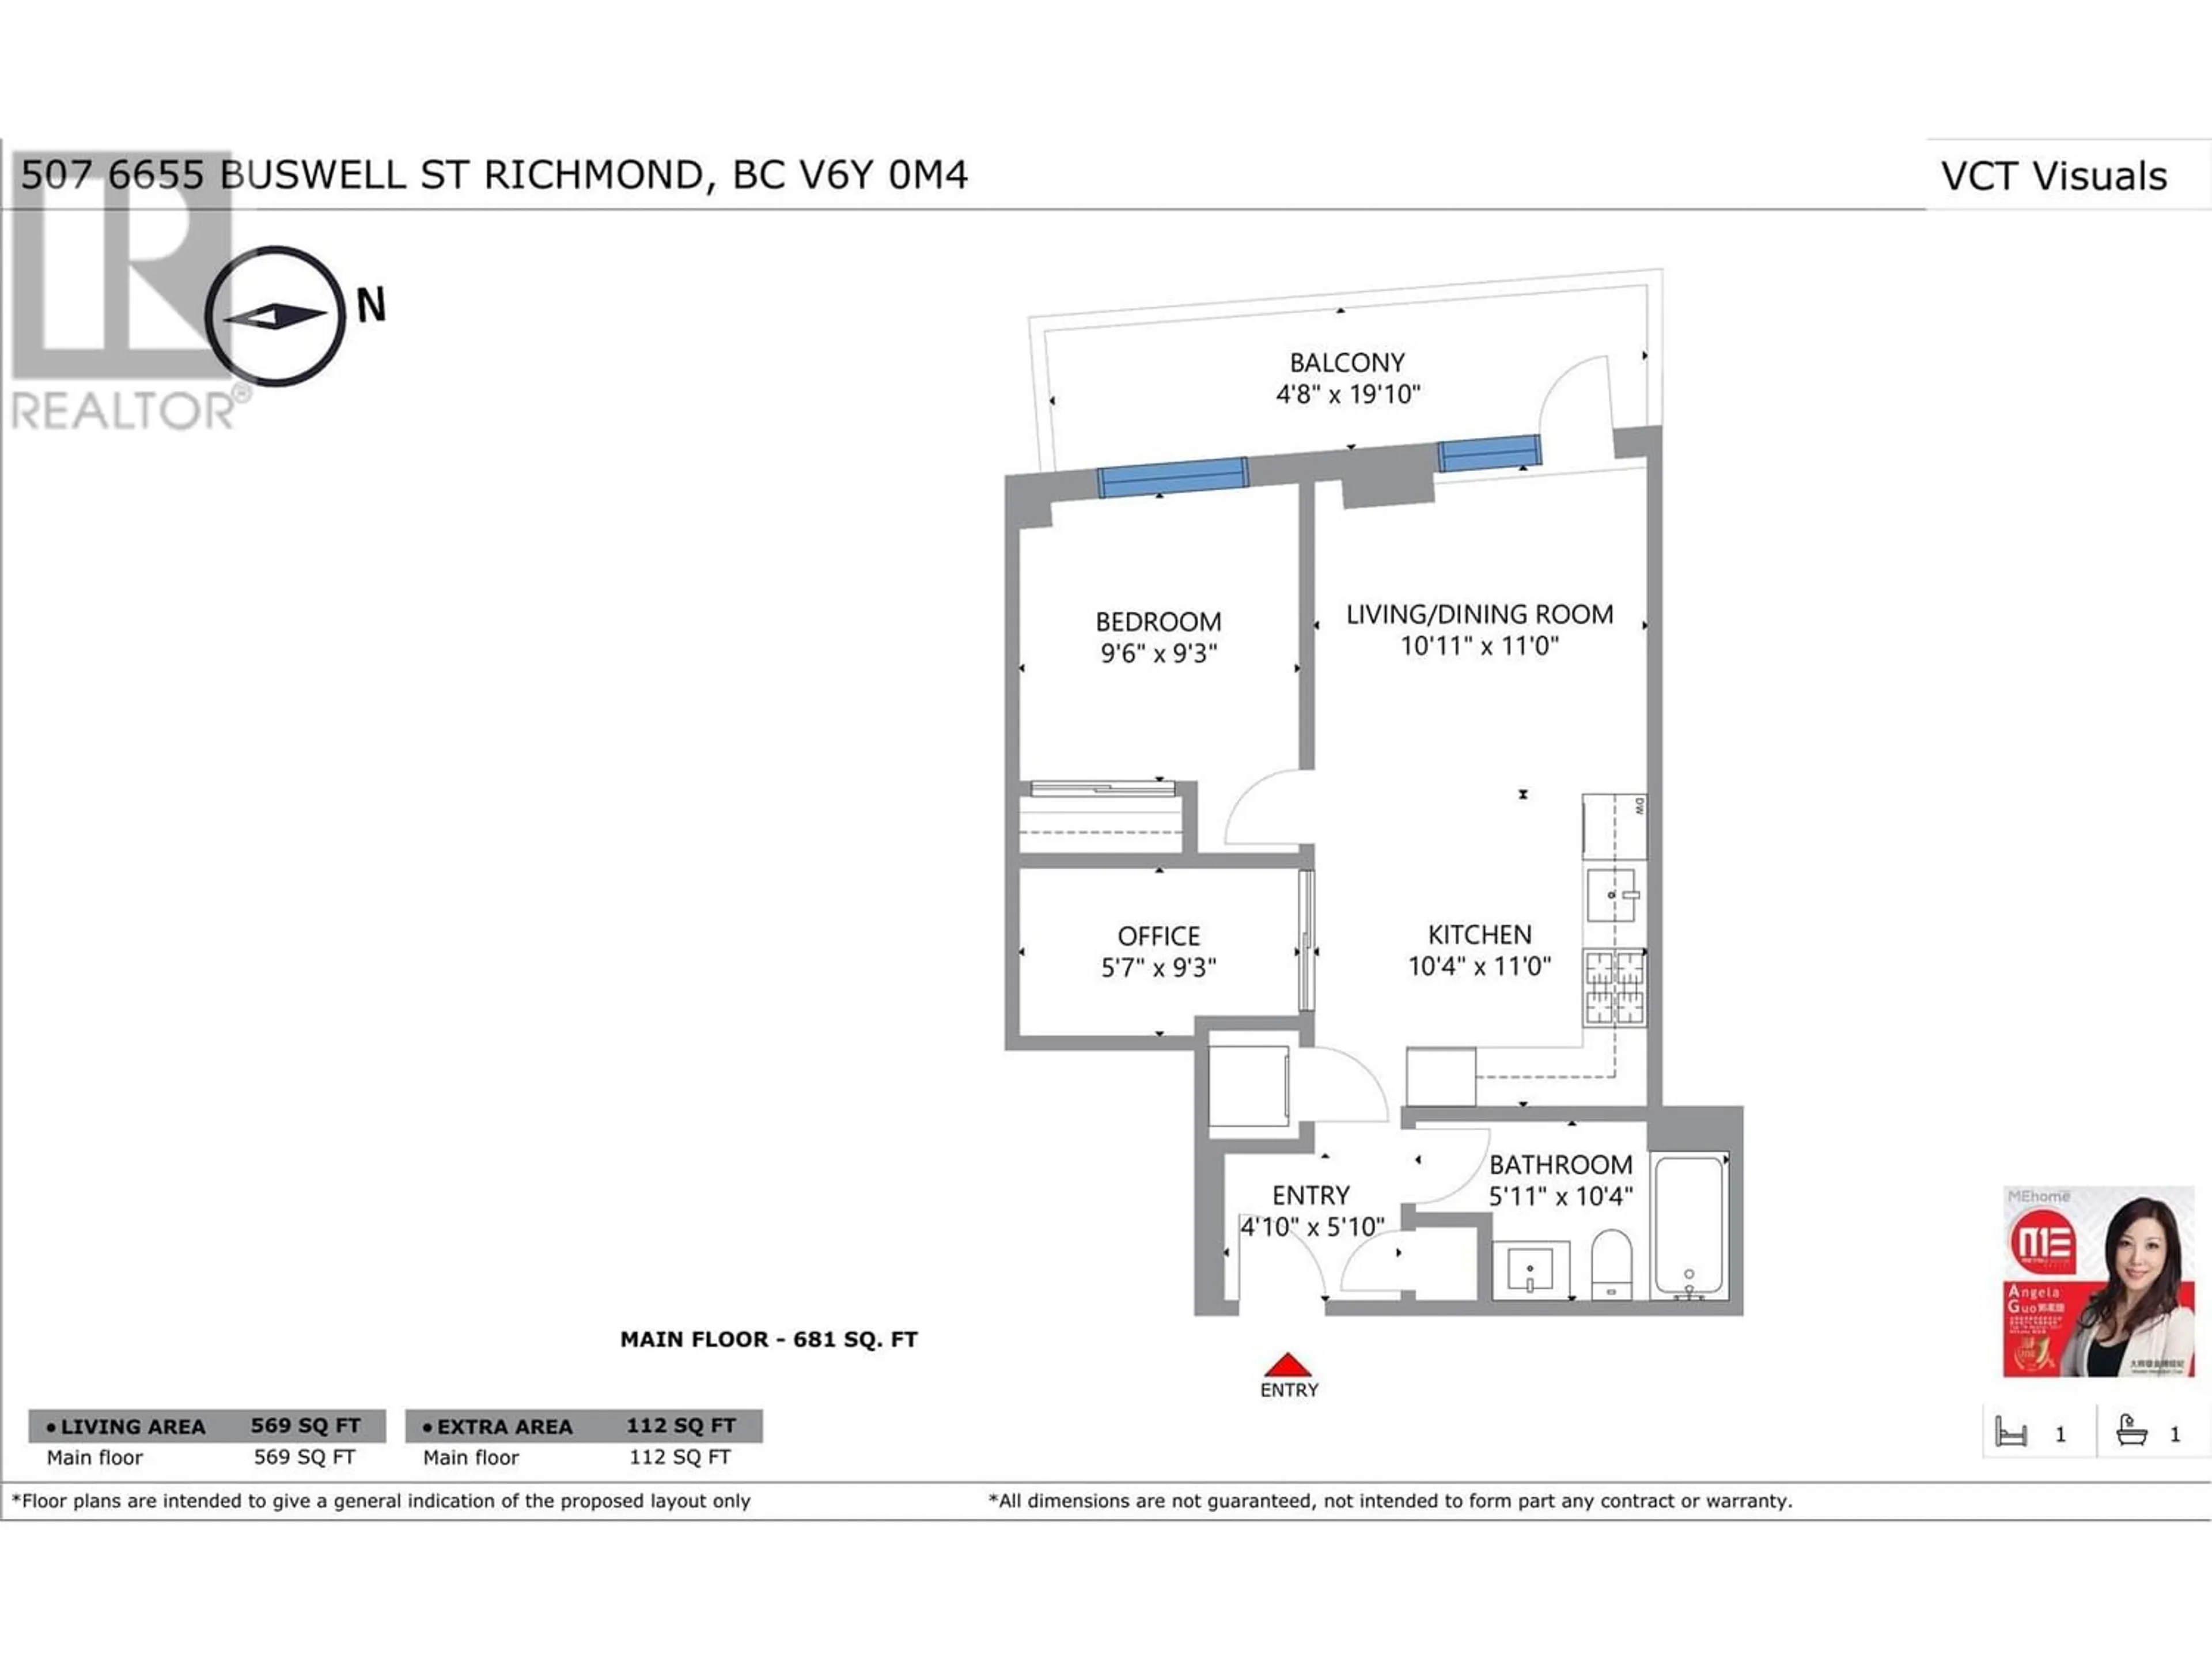 Floor plan for 507 6655 BUSWELL STREET, Richmond British Columbia V6Y0M4